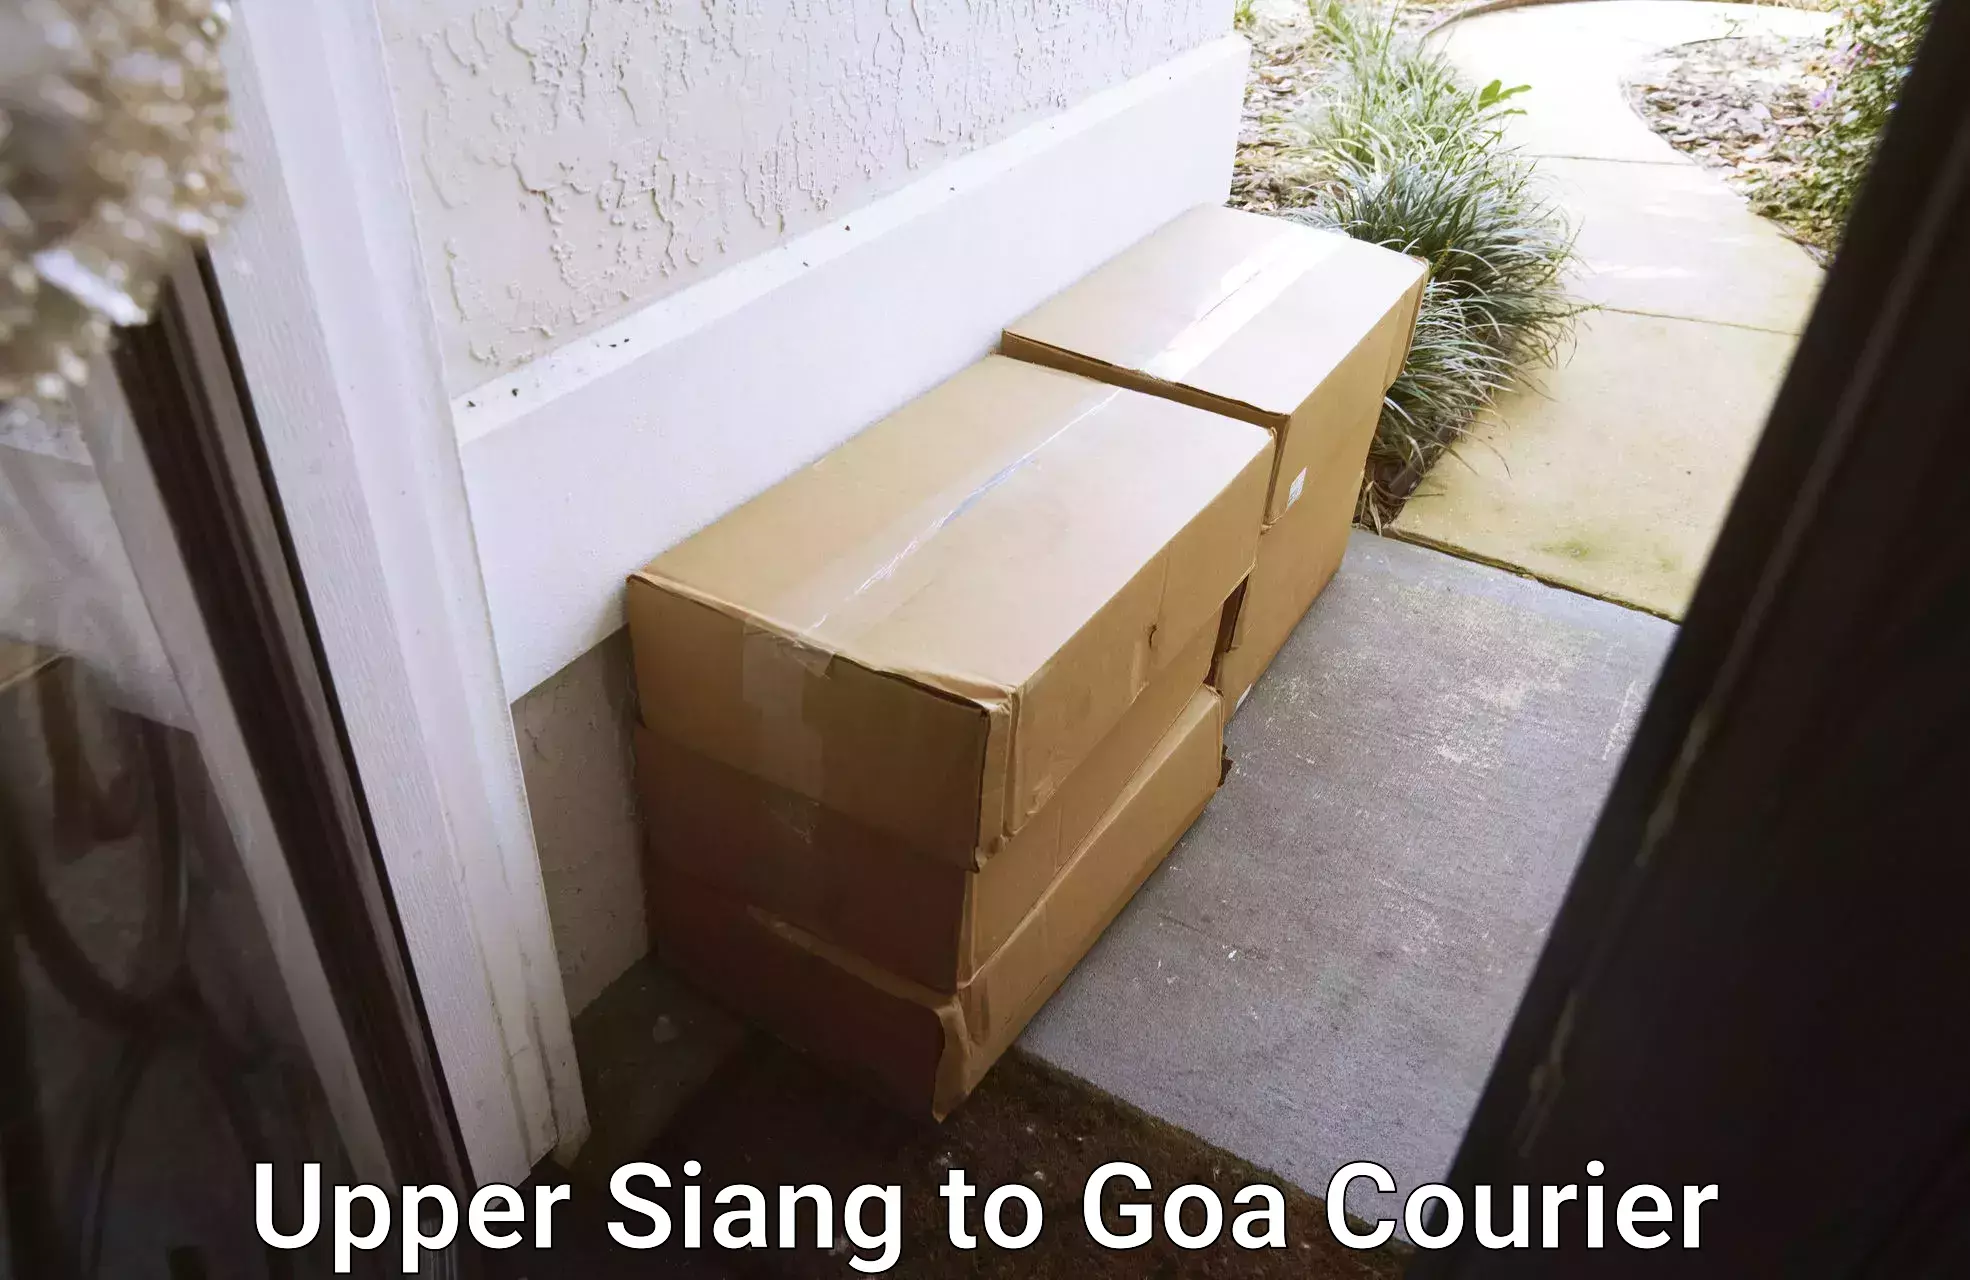 Courier service innovation Upper Siang to Goa University